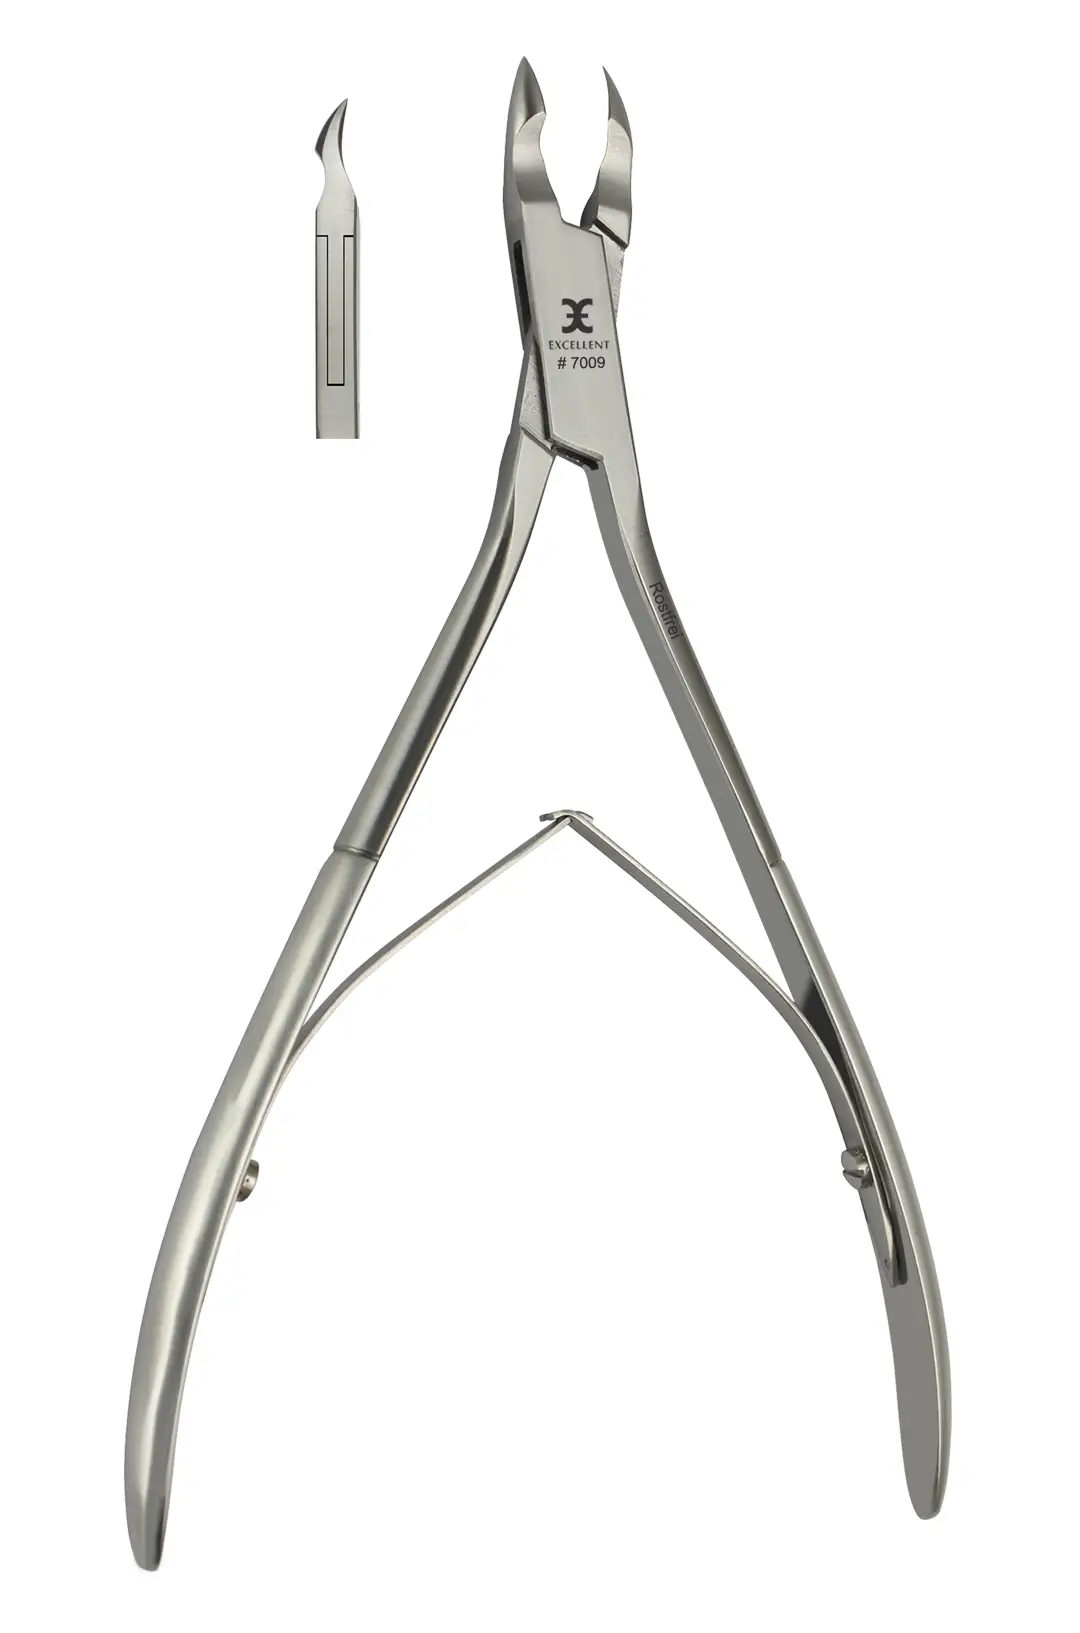 Excellent cuticle nippers 13.5 cm according to Winkler, cutting edge 7 mm